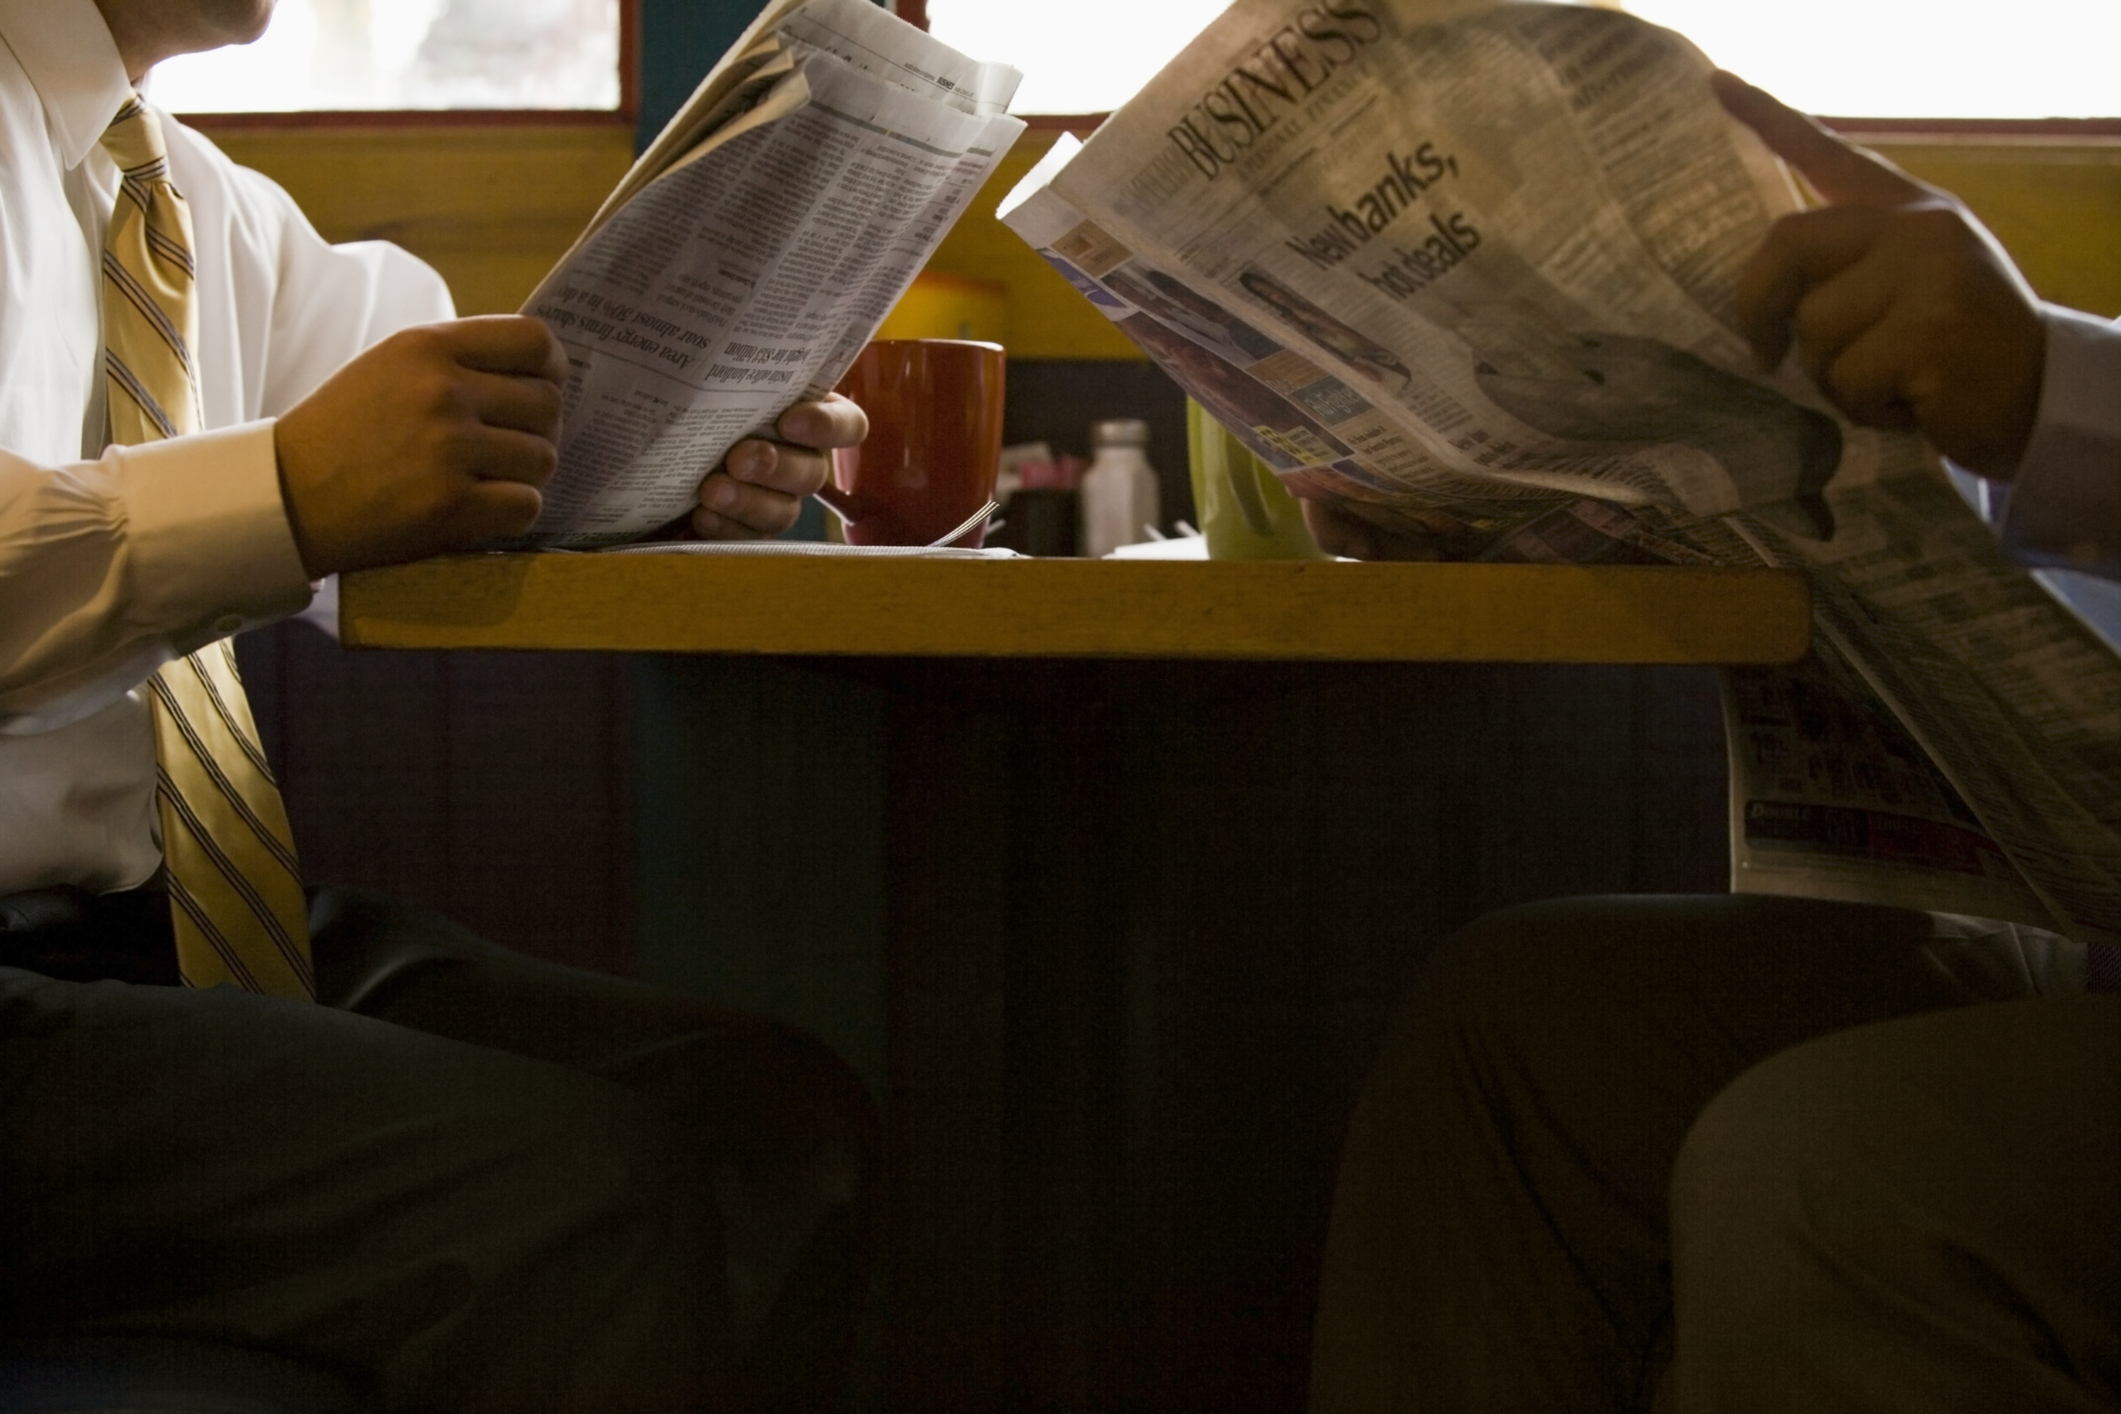 Two people are reading newspapers at a restaurant table